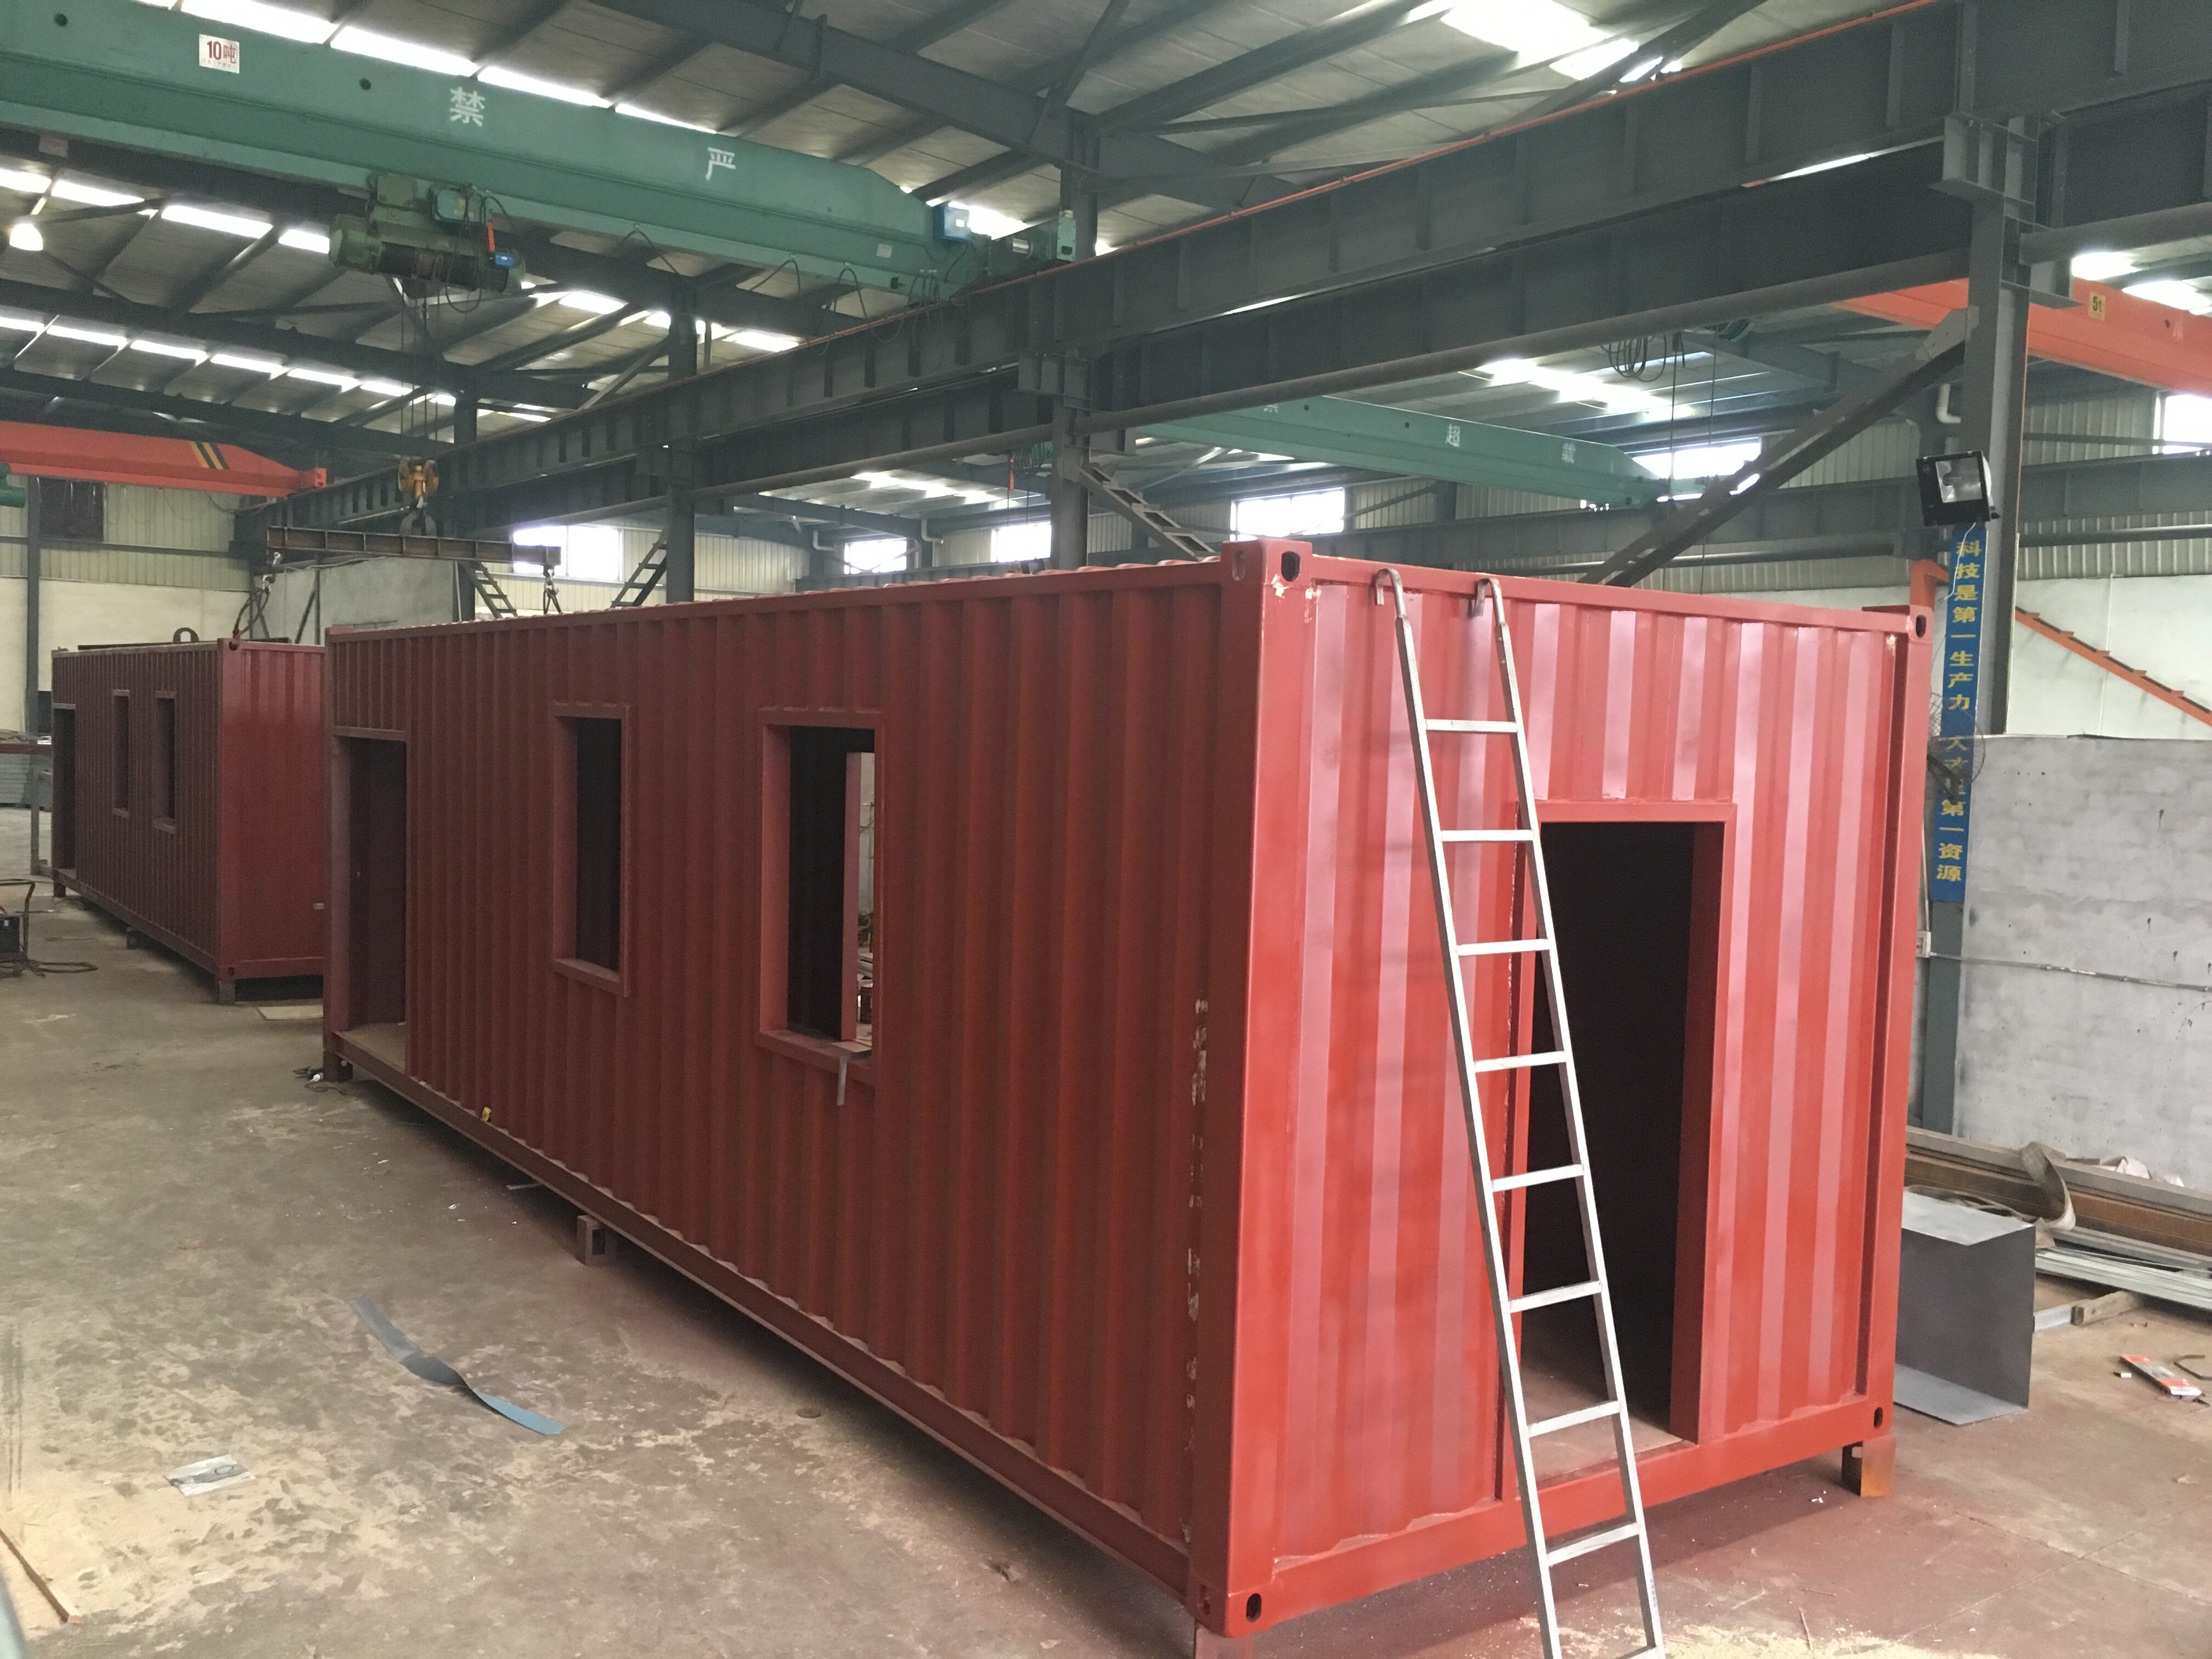 shipping container outdoor dining, sea containers private dining, dining tralier container company, dining tralier container exporter, dining tralier container china